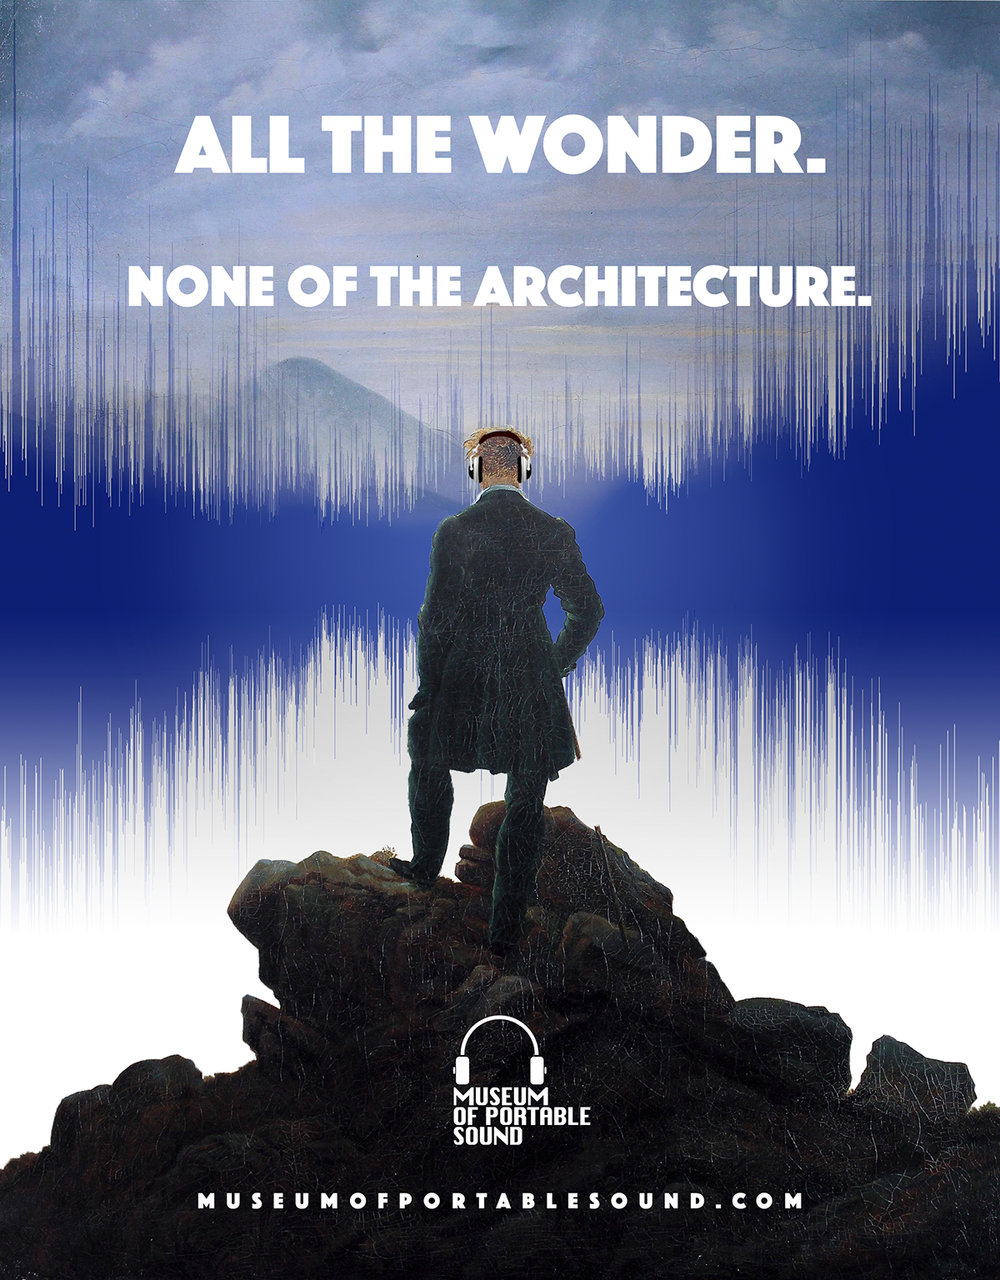 All the wonder. None of the Architecture. (Promotional poster)